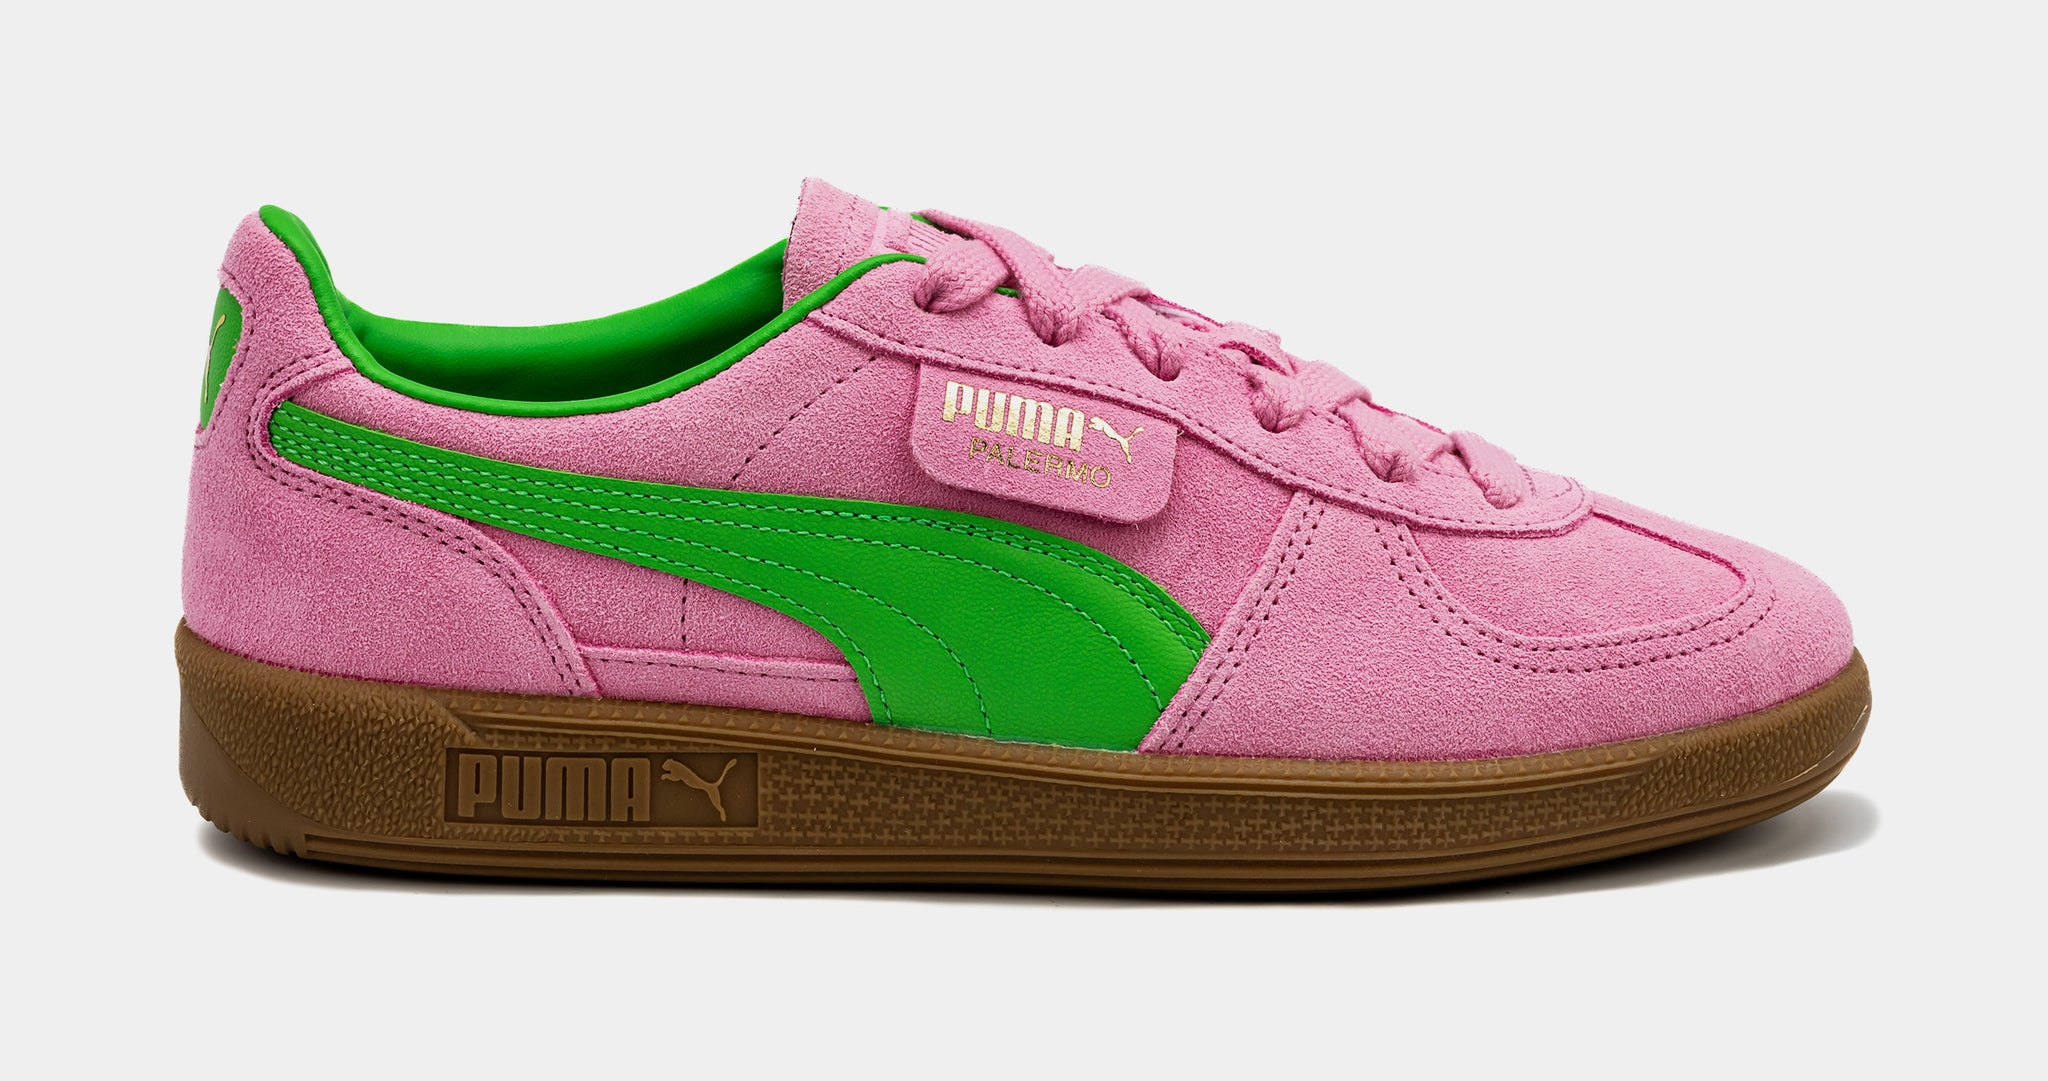 PUMA Green Shoes Shoe 397858 Womens Special Lifestyle Pink Palace Palermo – 01